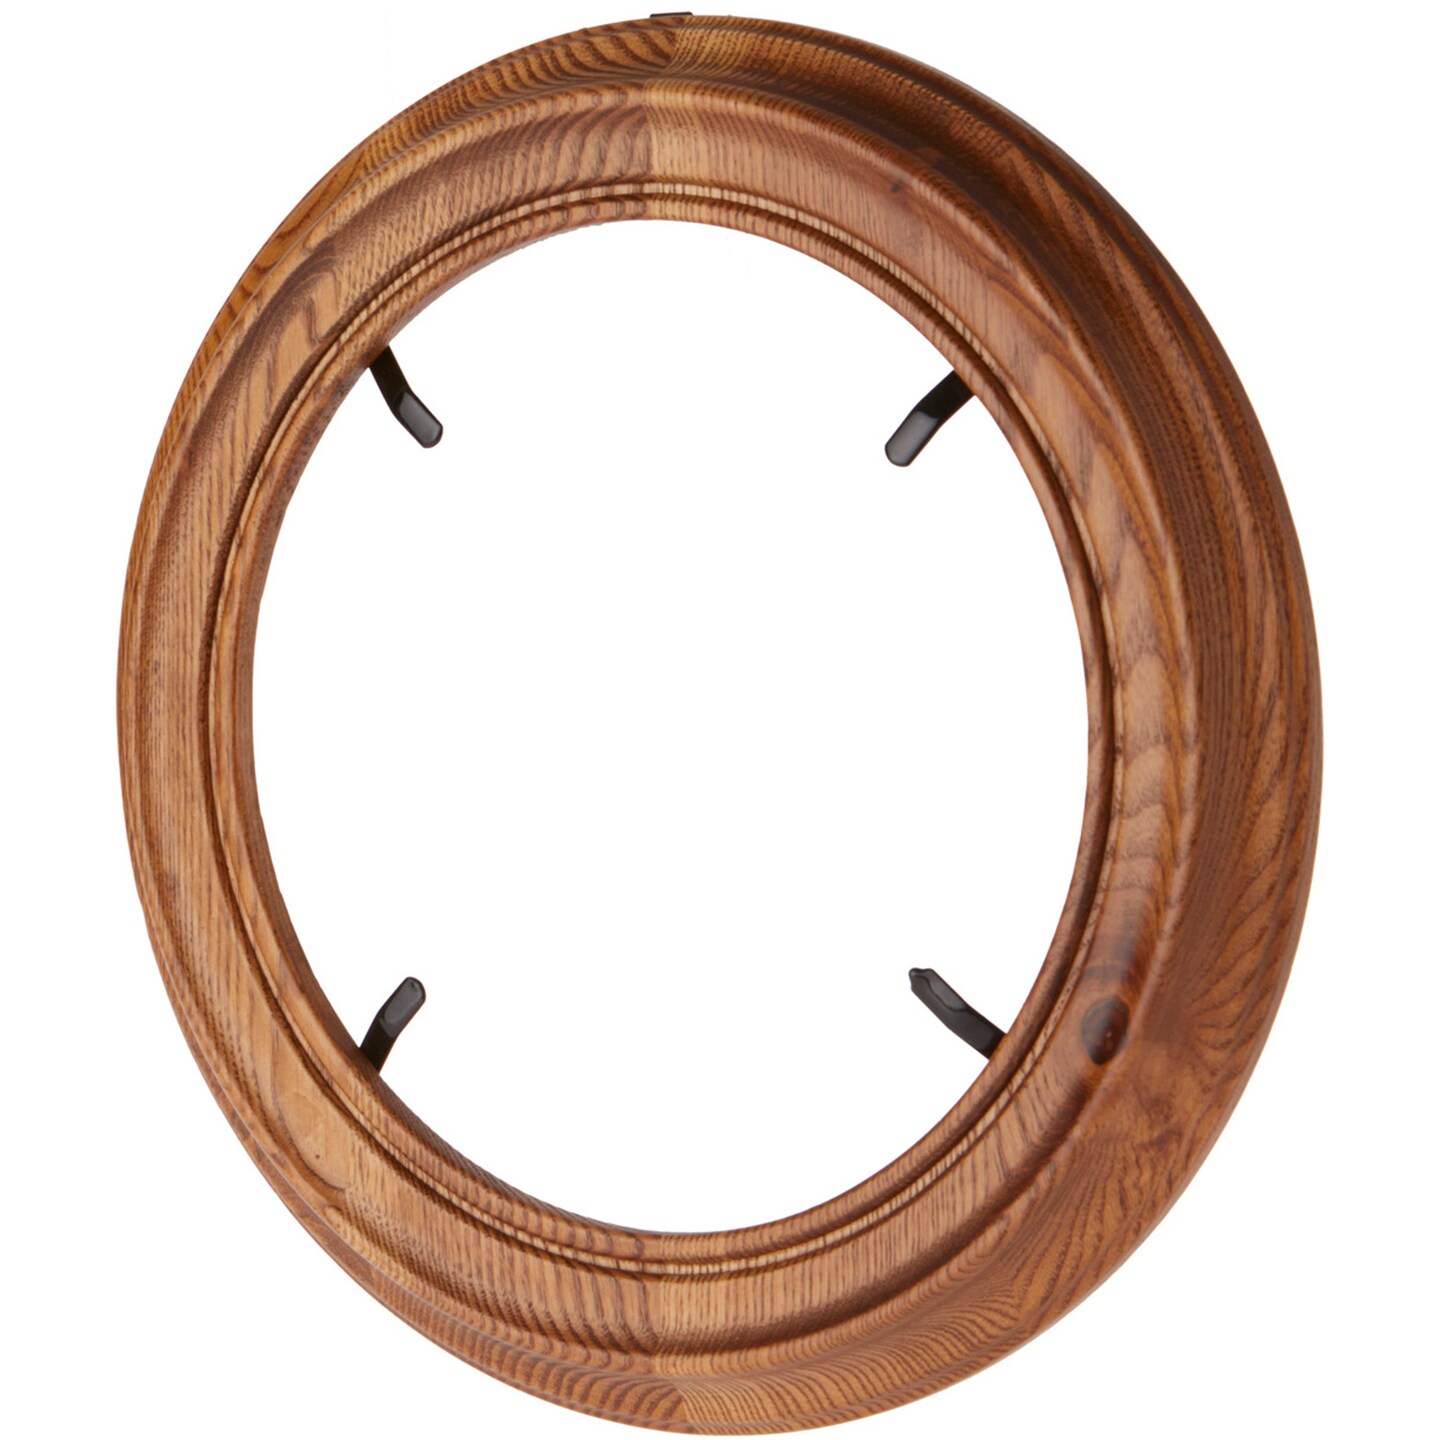 Bard&#x27;s Red Oak Finish Round Wall Mountable Plate Frame, 11.25&#x22; H x 11.25&#x22; W x 0.5&#x22; D (For 8.25&#x22; - 9.25&#x22; Plates)